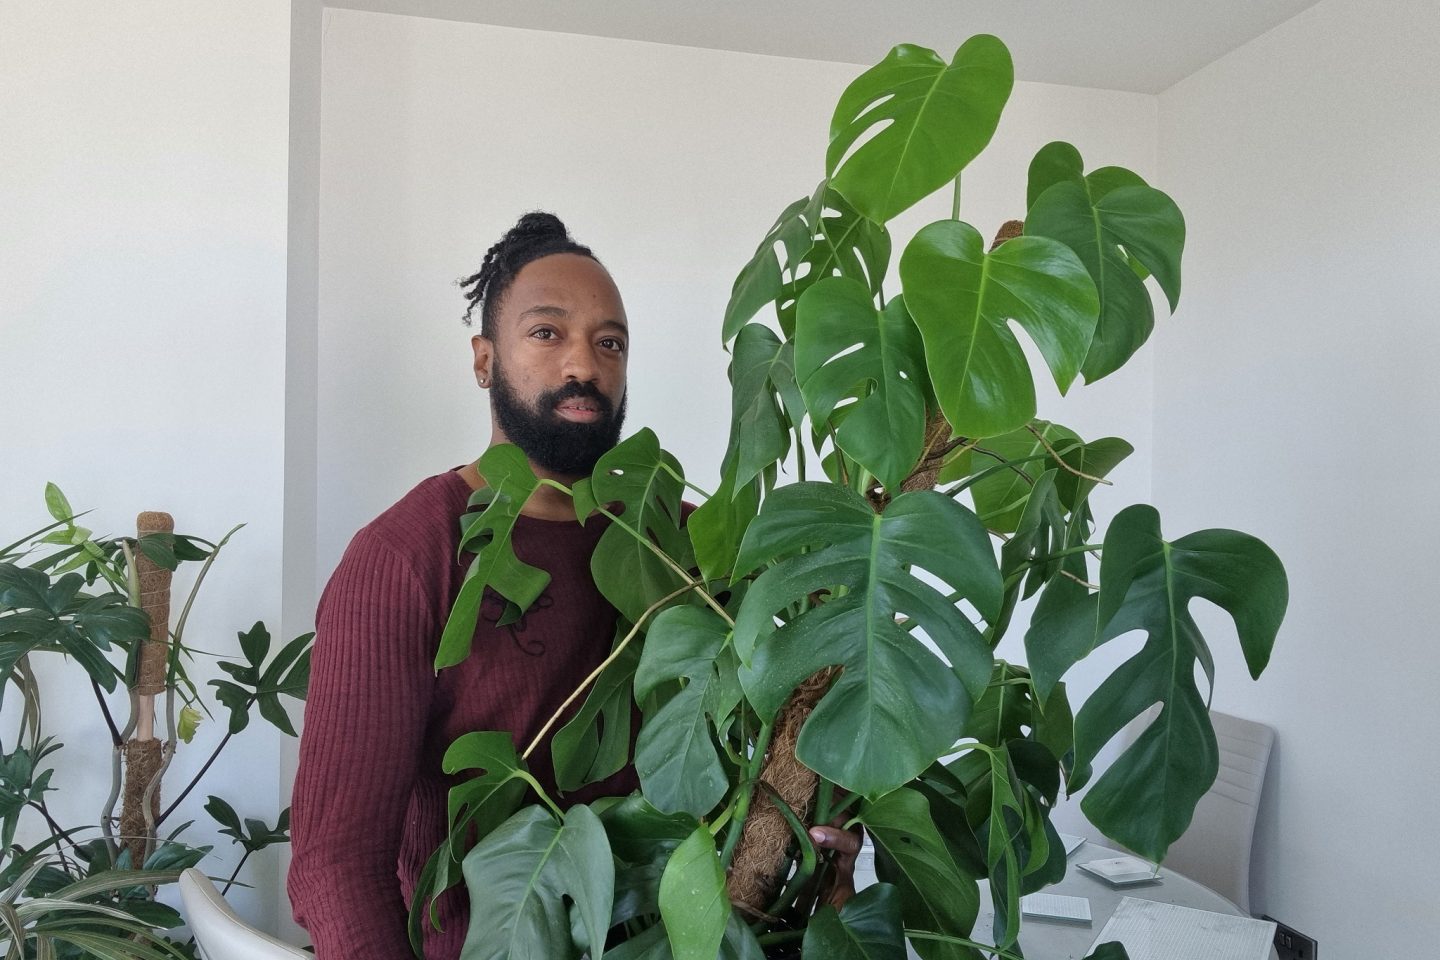 Jason the Cloud Gardener with Chad the Monstera Deliciosa